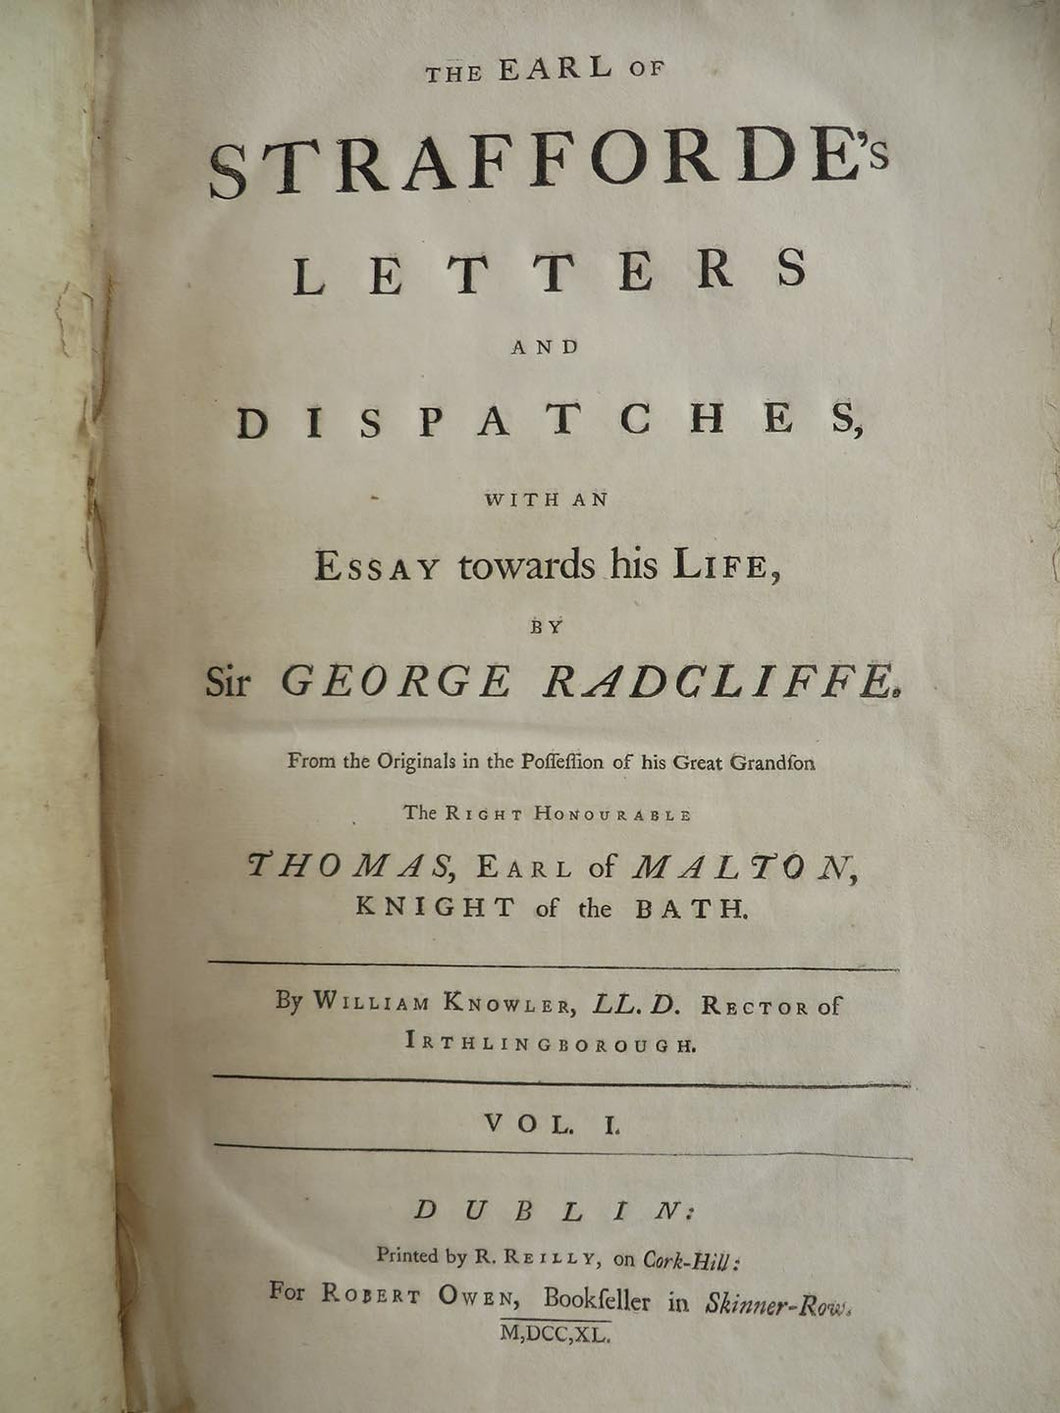 The Earl of Strafforde's Letters and Dispatches with an Essay towards his Life by Sir George Radcliffe. From the Originals in the Possession of his Great Grandson, the Right Honourable Thomas, Earl of Malton, Knight of the Bath.